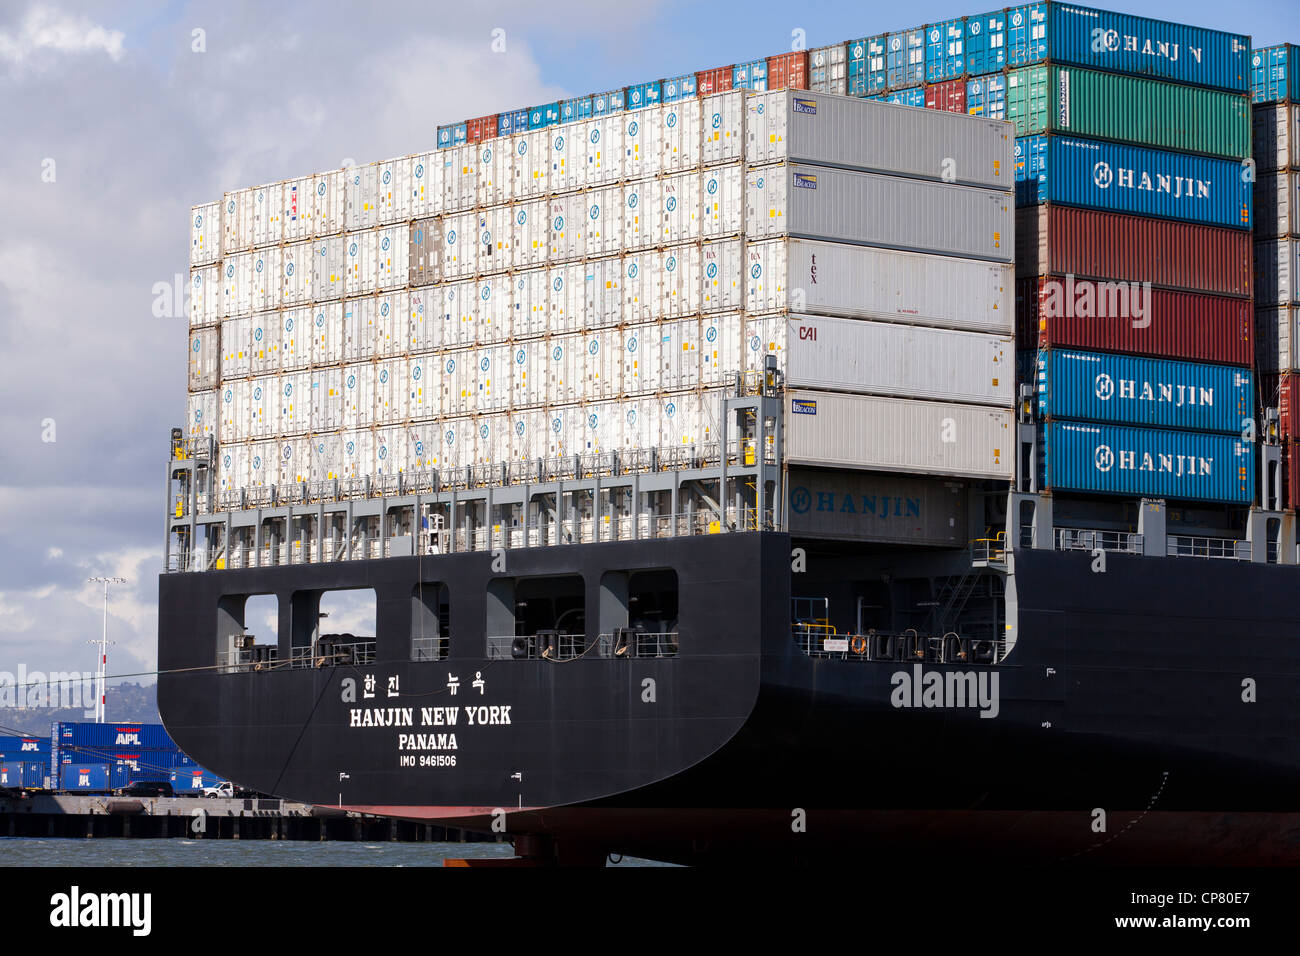 The stern side of a Hanjin cargo ship showing stacked containers at port - San Francisco, California USA Stock Photo